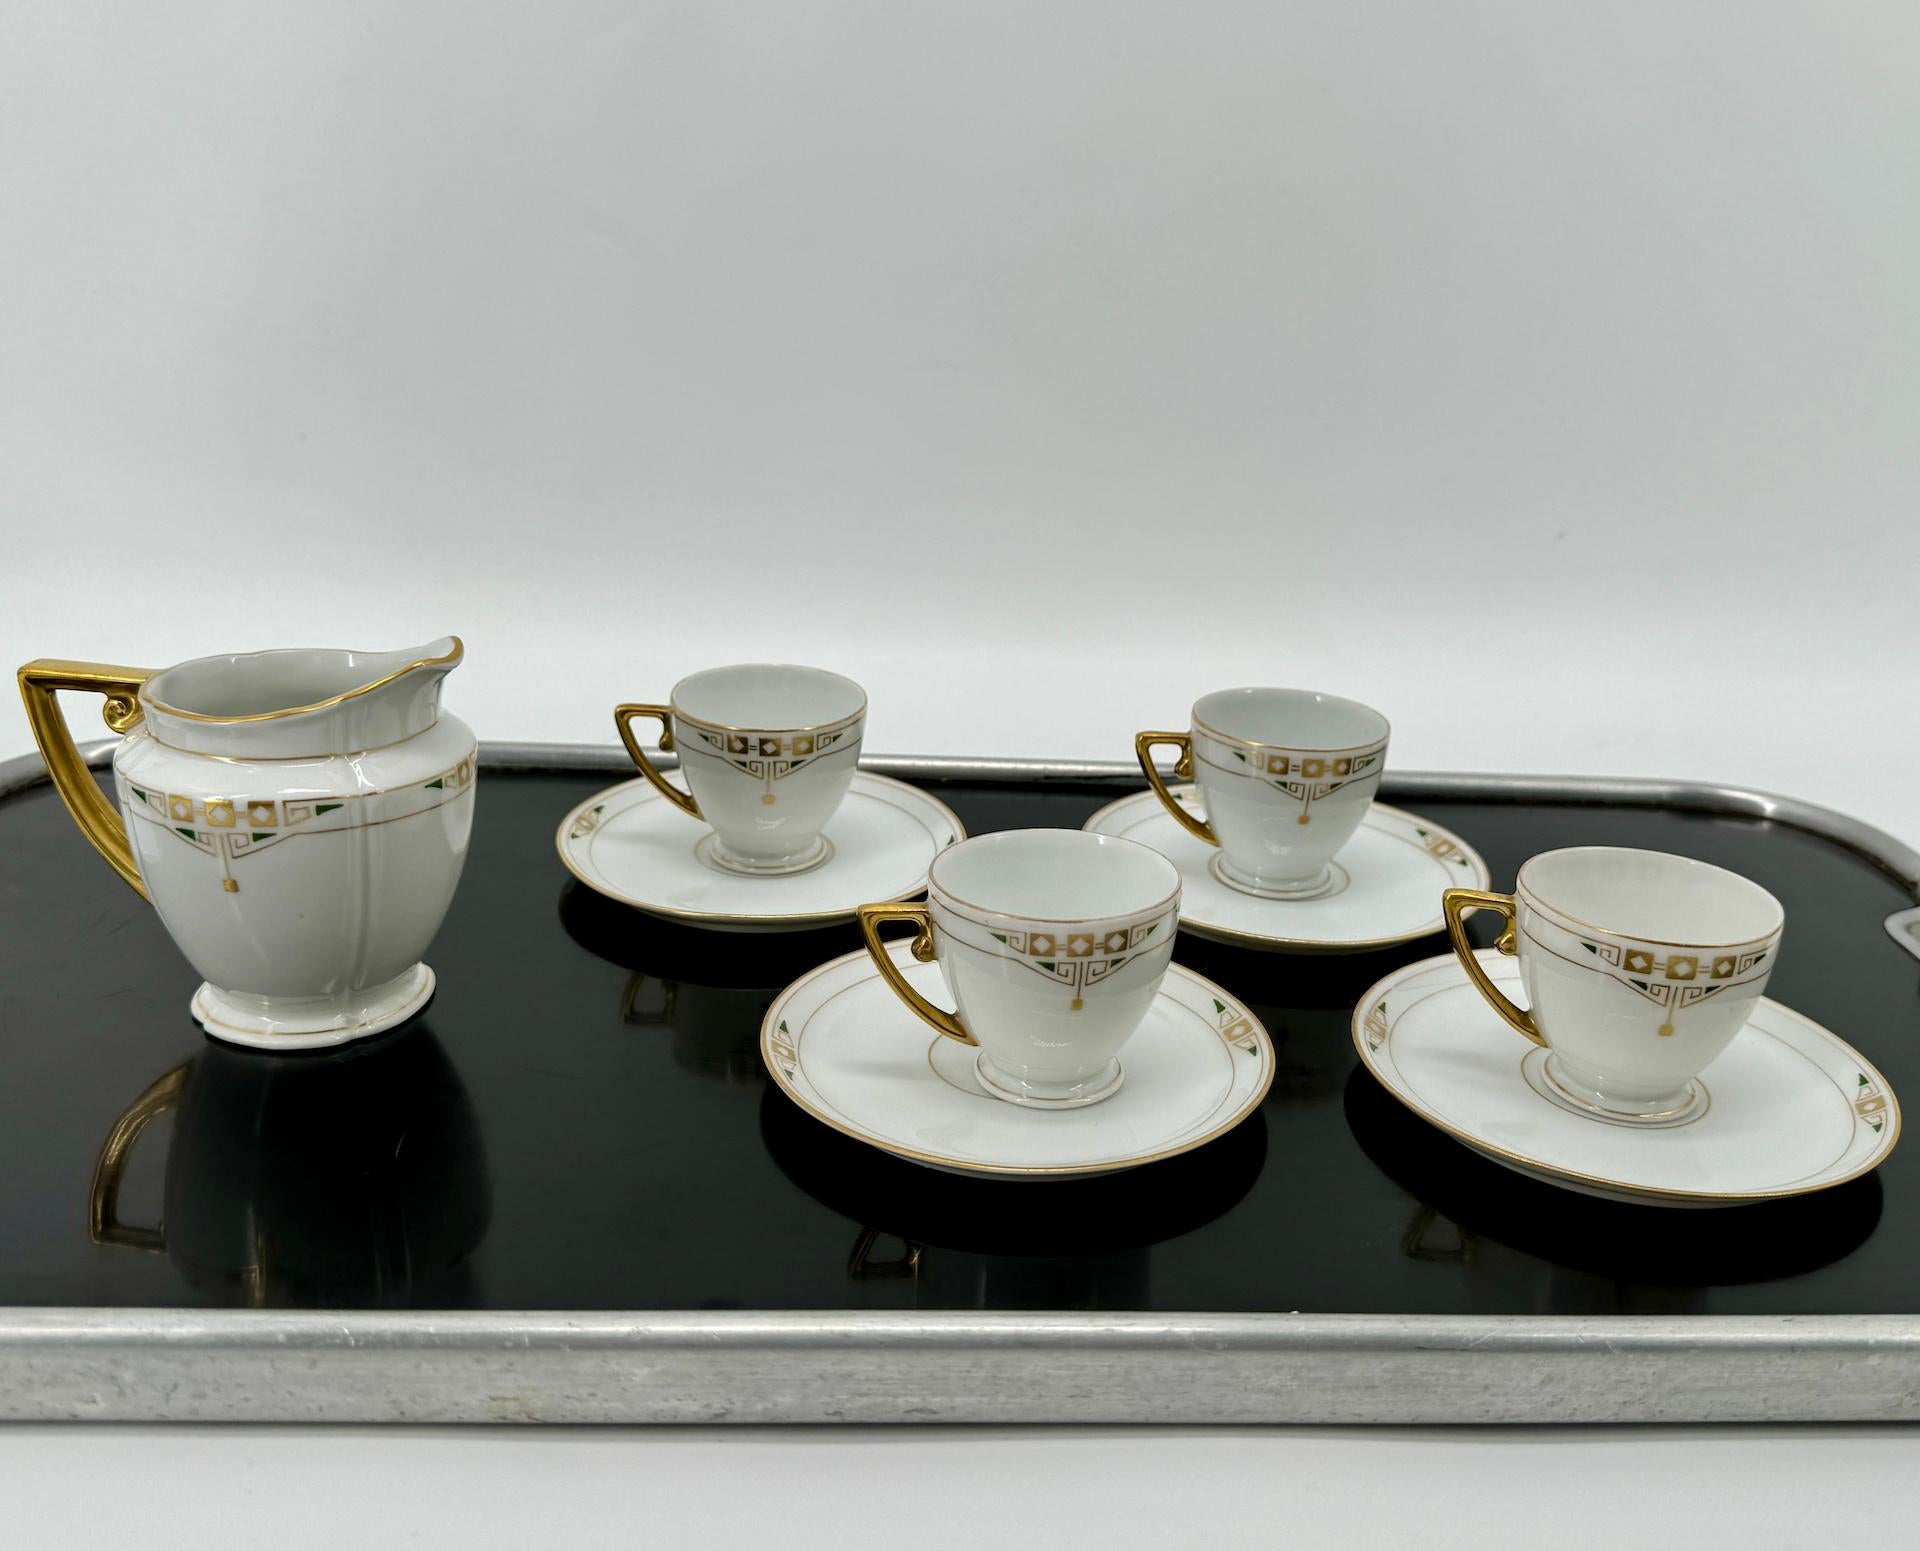 4 Mocha Cups And Saucers And Austrian Art Nouveau Milk Jug

Here is a very rare coffee service of fine Austrian porcelain from the Imperial PSL Empire factory, circa 1890.

Mocha is a complex and elegant coffee, considered the most flavorful of